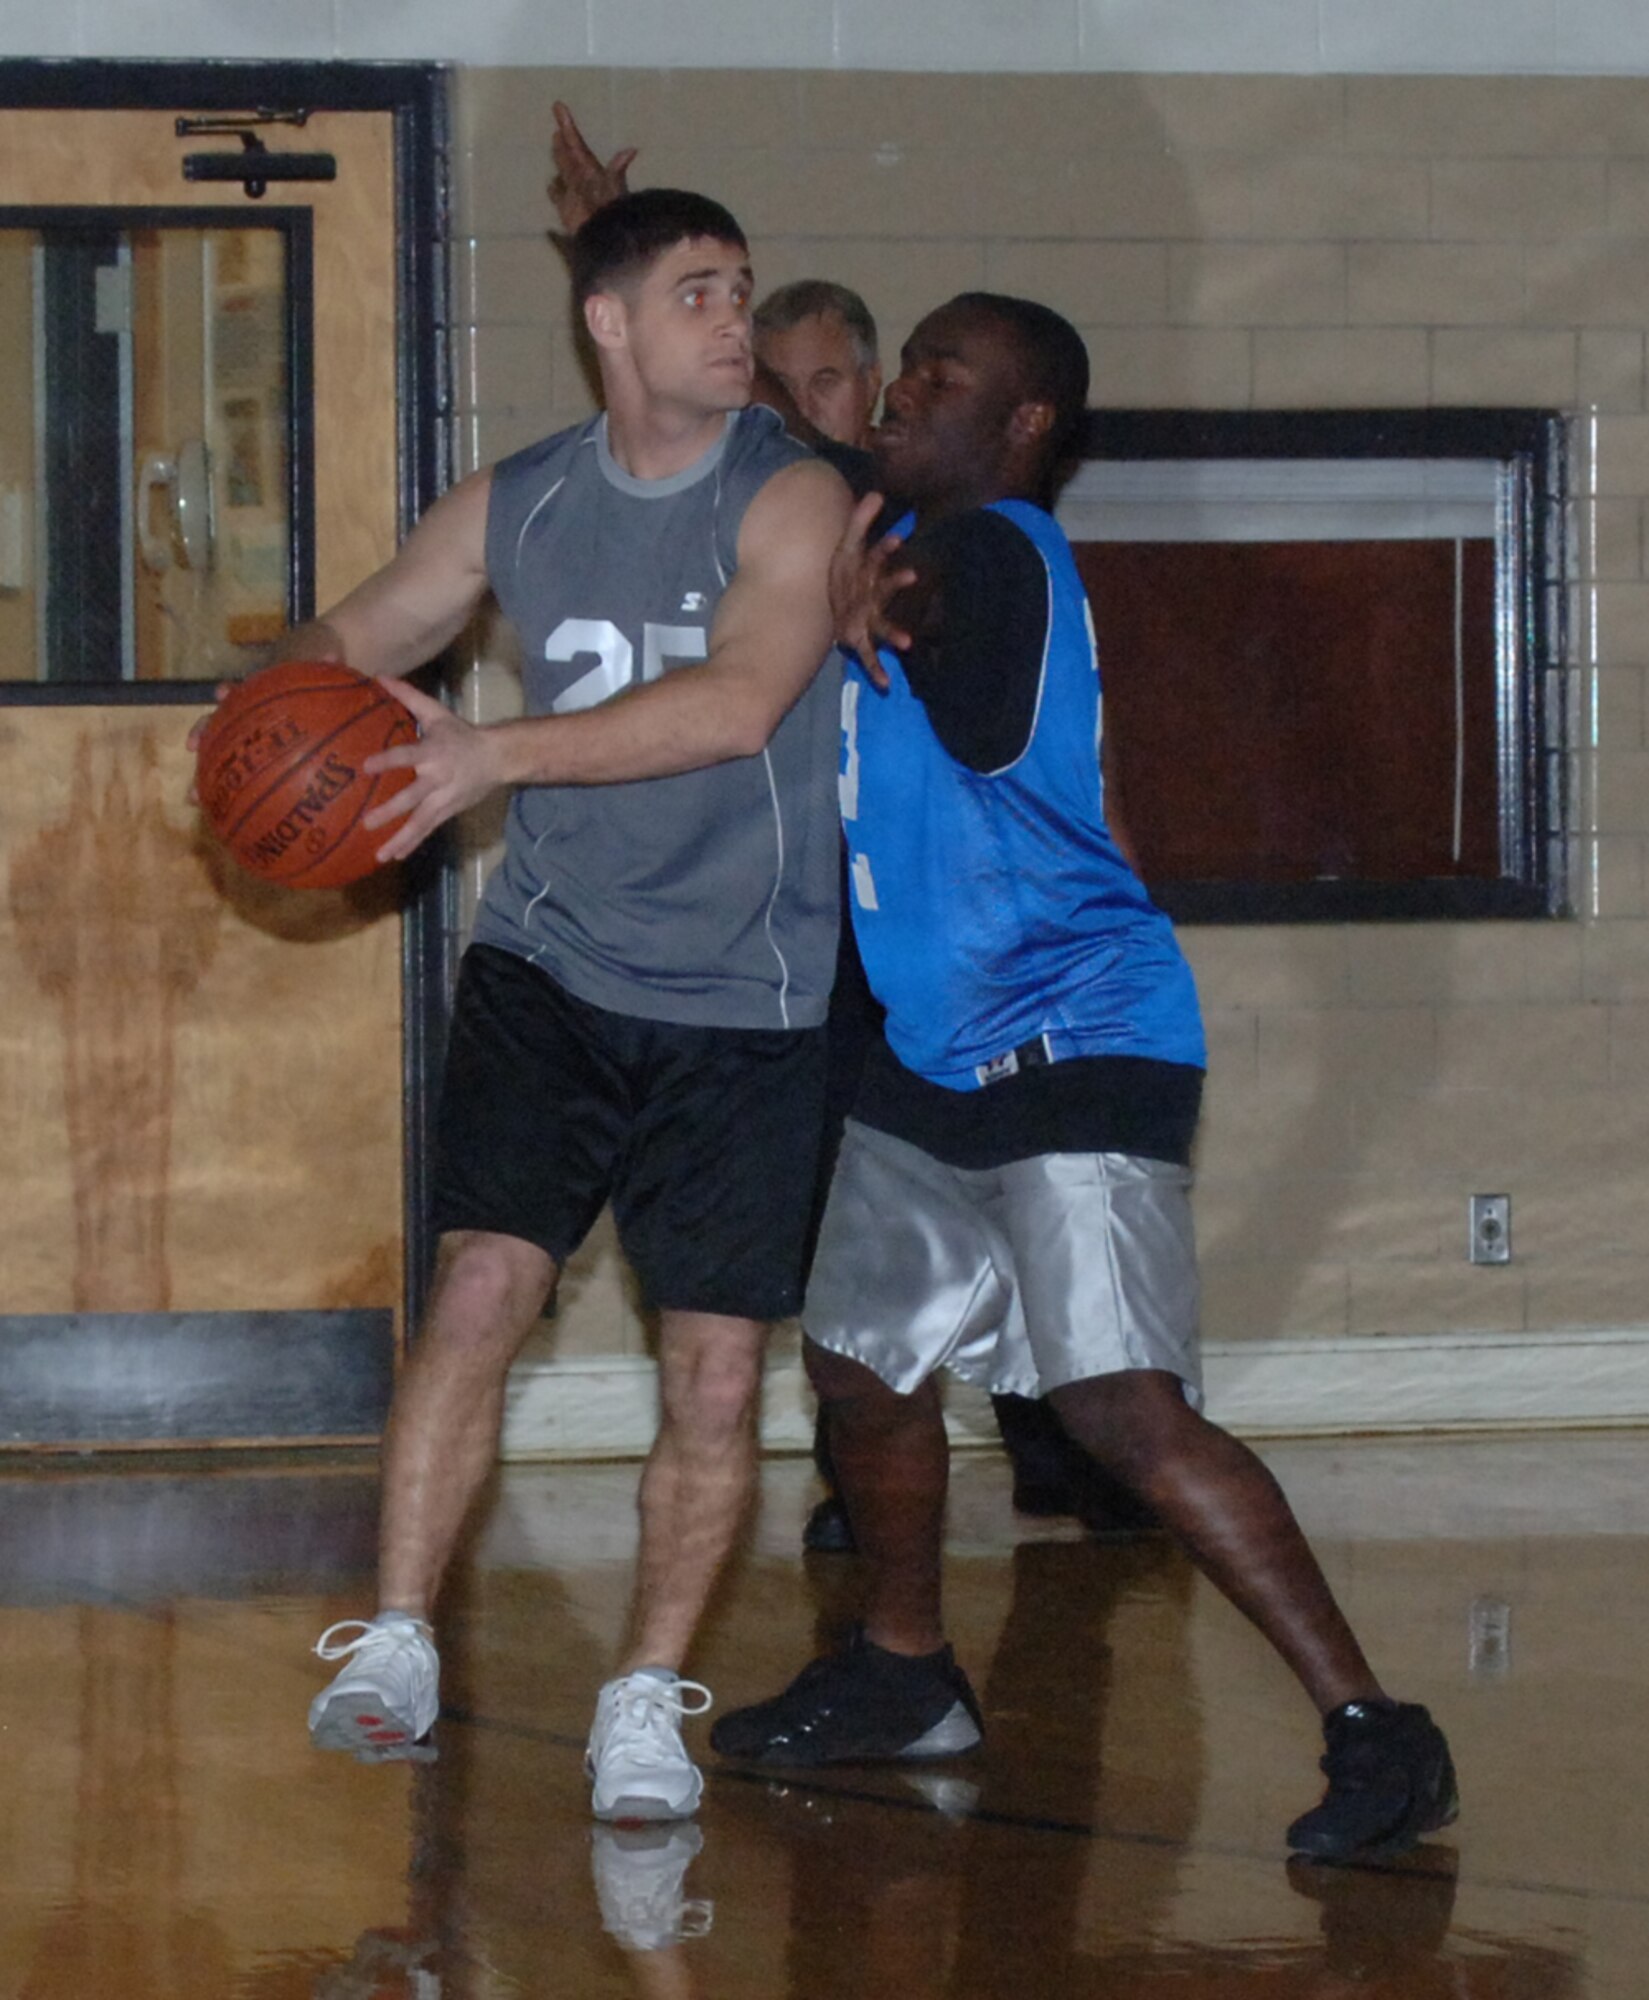 First Lt. Michael Hawkins, 14th Mission Support Group, looks for an open teammate while Airman 1st Class Tony Savage, 50th Flying Training Squadron, defends him in intramural basketball action Wednesday night. (U.S. Air Force photo by Airman 1st Class Danielle Hill)
